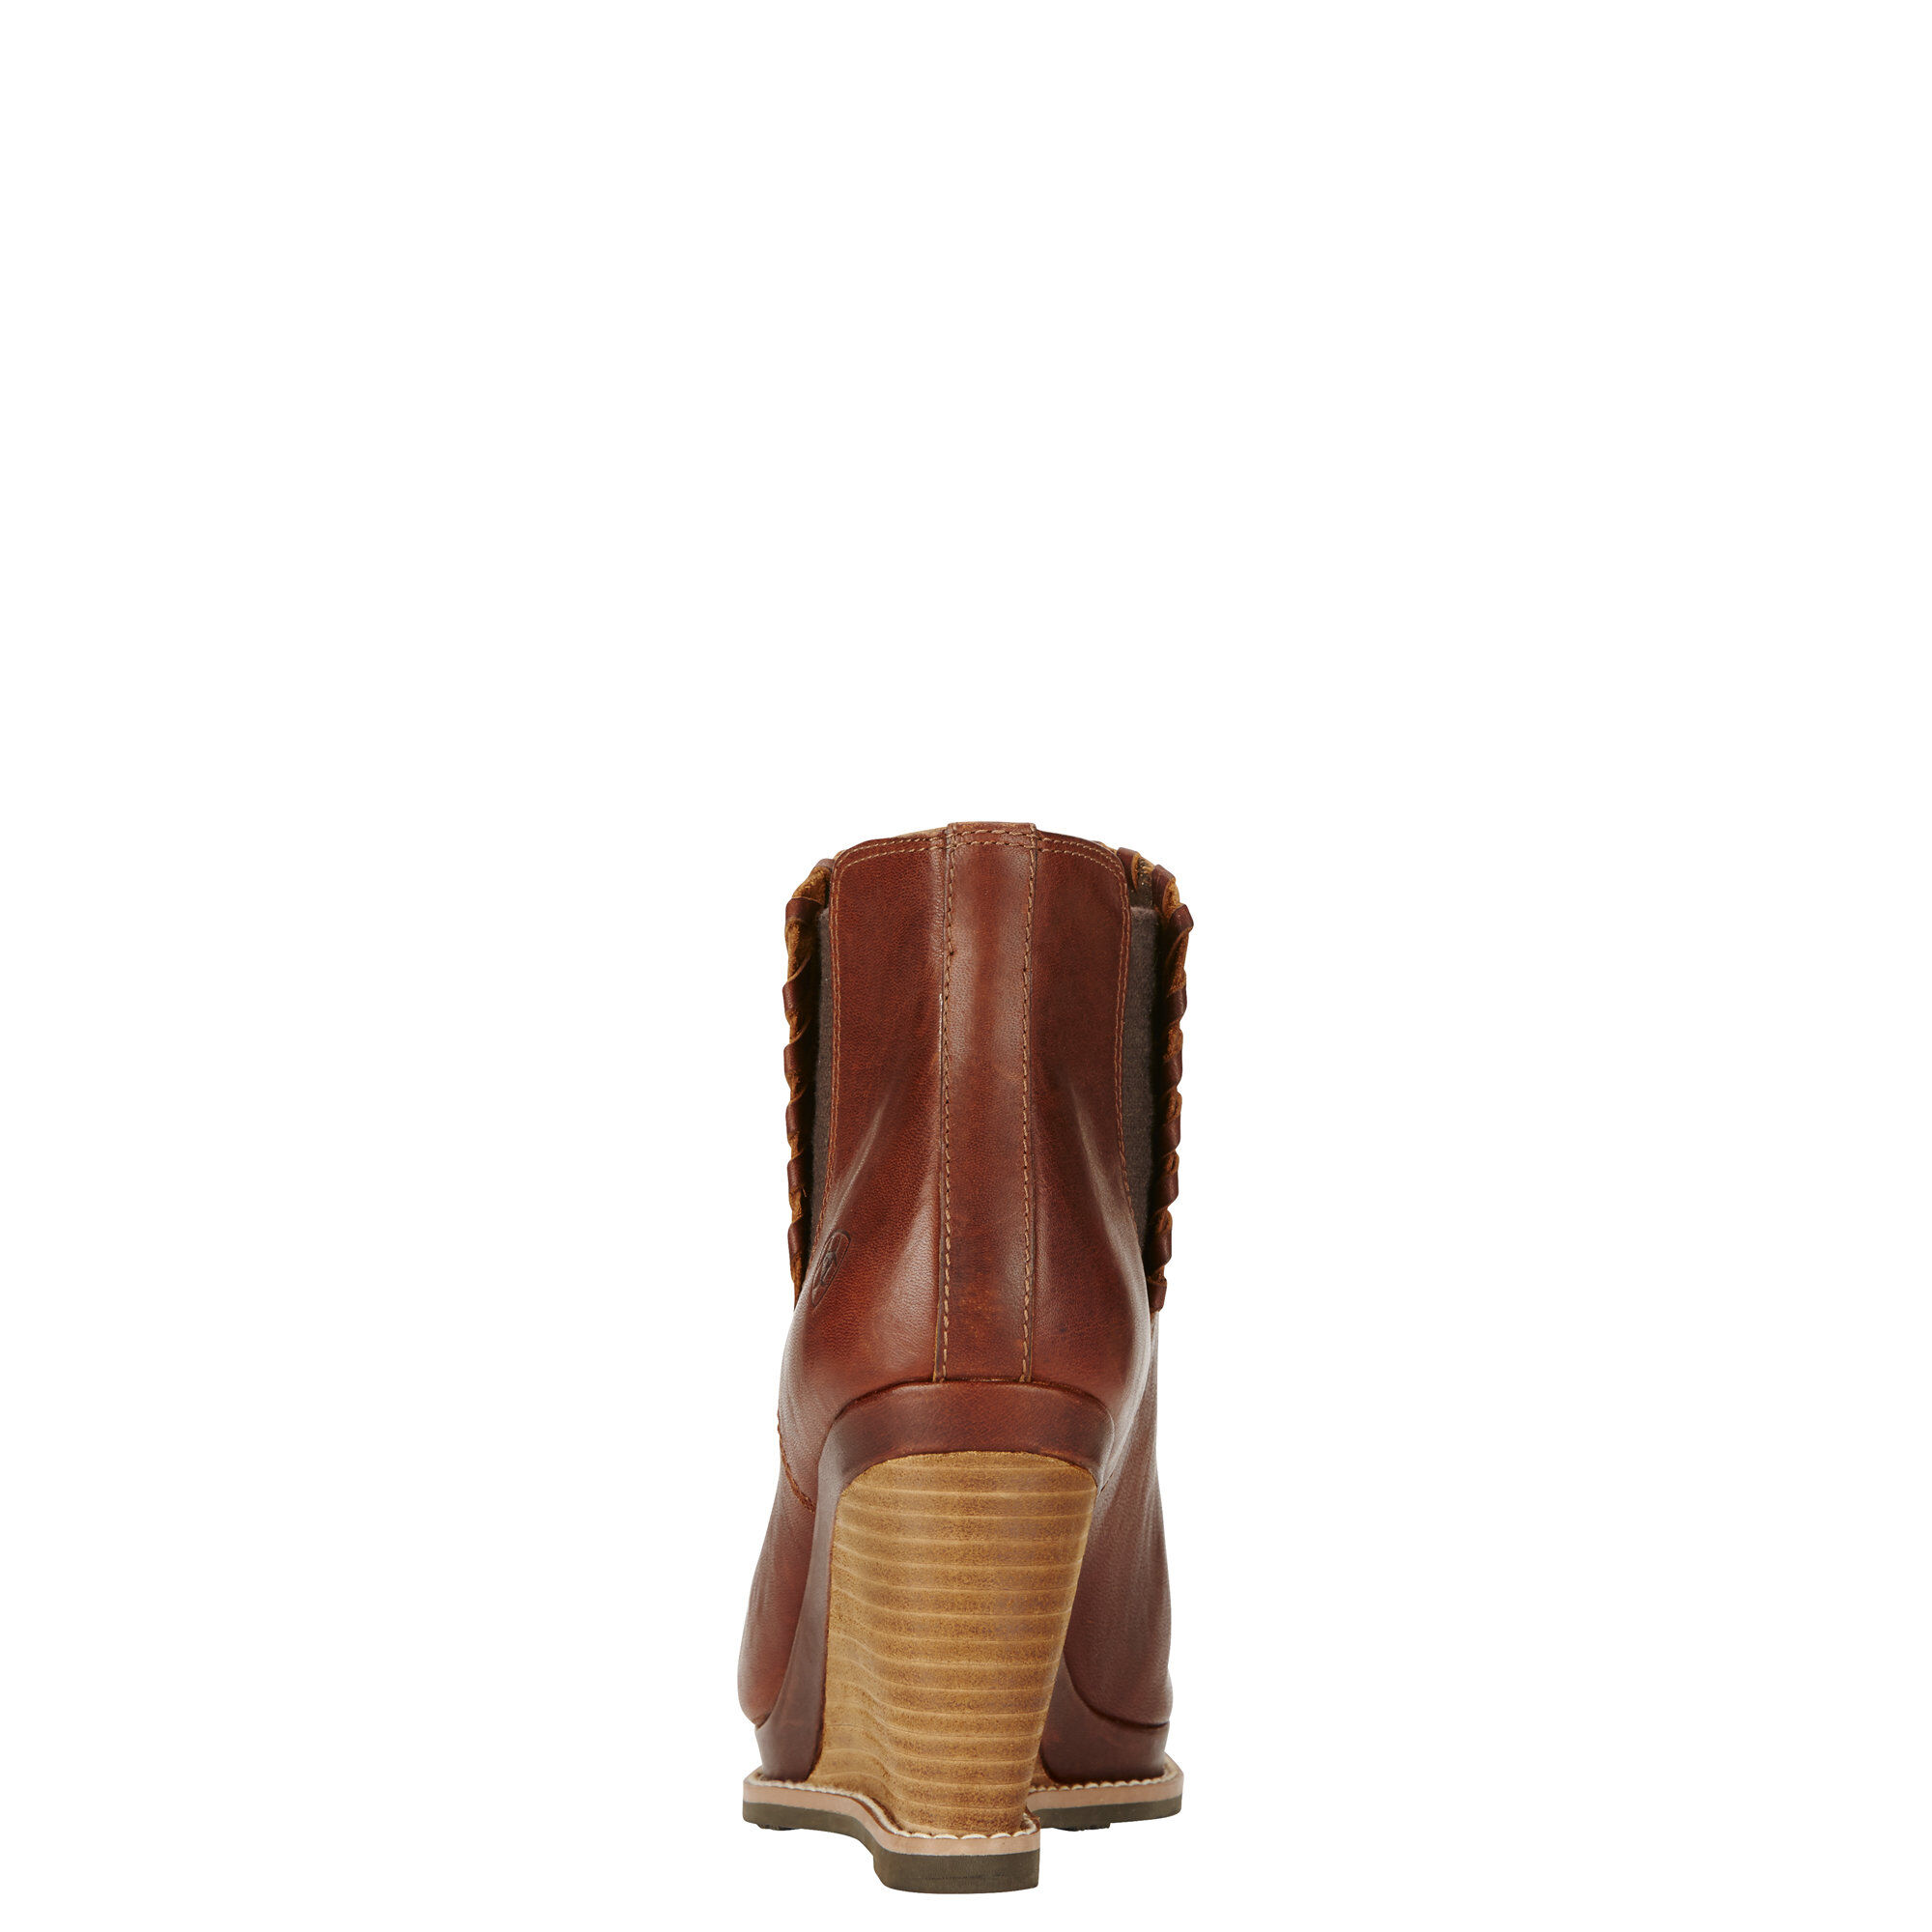 ariat belle wedge ankle boots